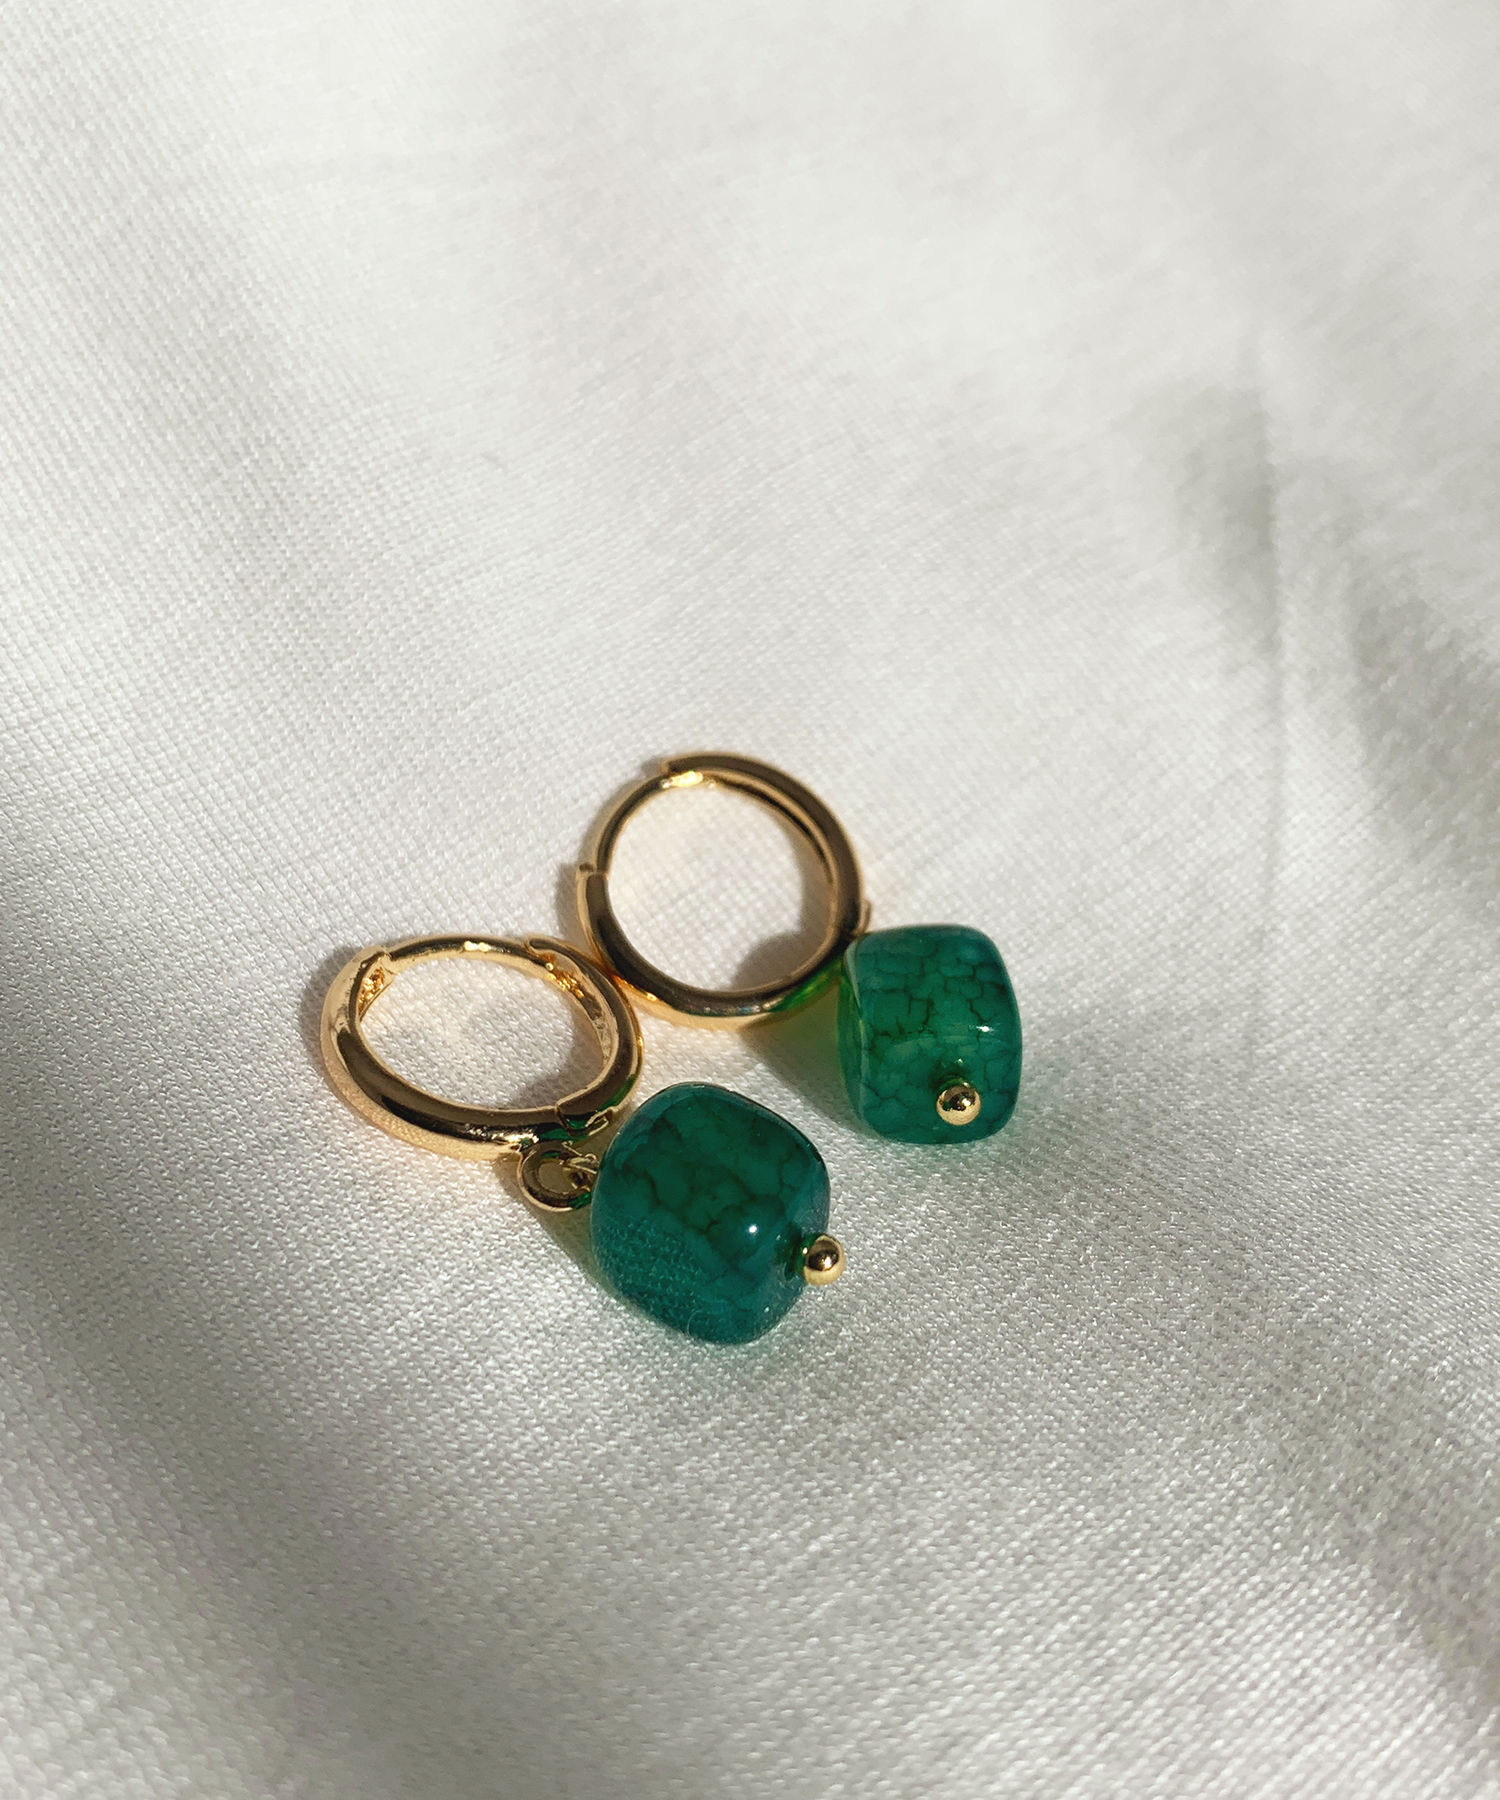 best seller, customizable huggie earrings that suit your personal taste, choose the color of gemstone and of the huggie earrings, natural gemstone, small, adds a pop of color to your everyday style